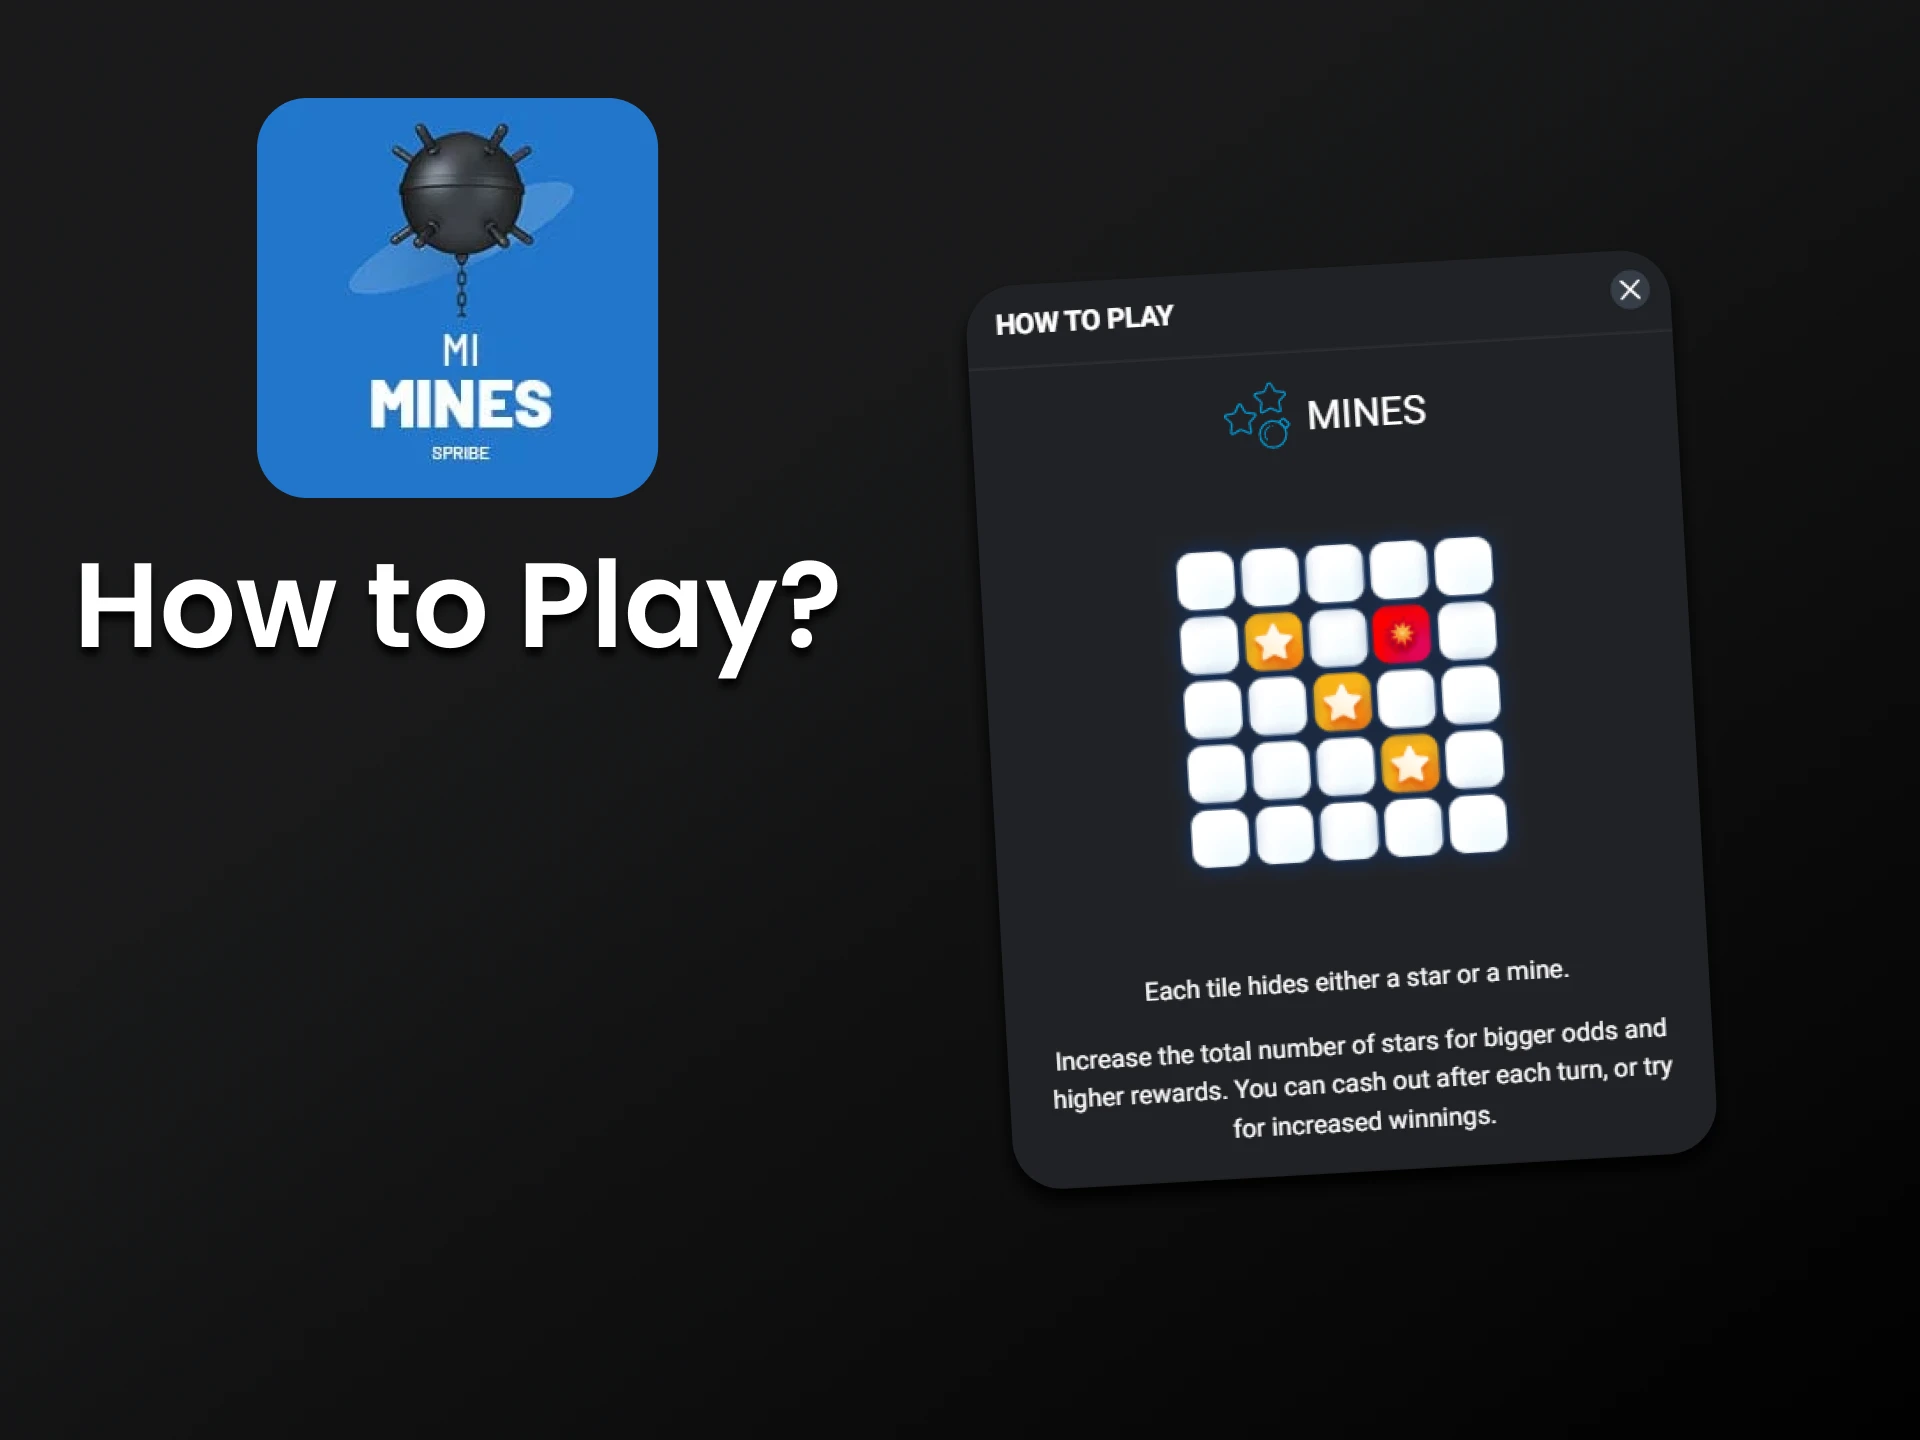 Find out how to start playing the game Mines.